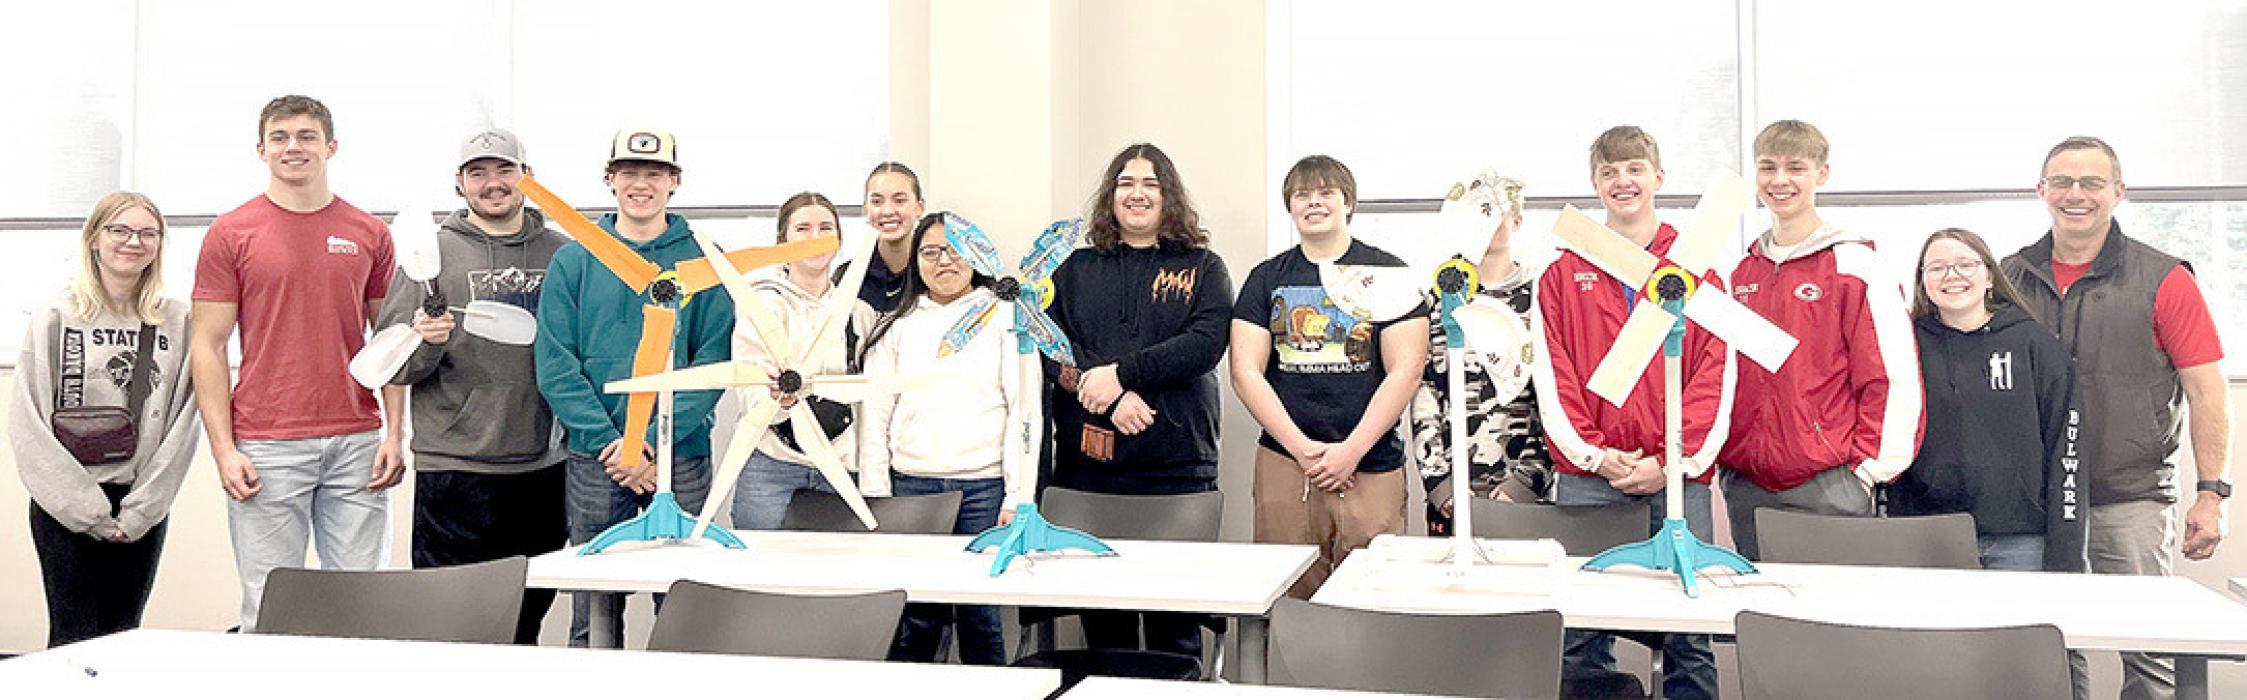 Finola Reuer, Max Cook, Jamison VanderPol, Jess Vanderpol, Dani Timanus, Asia VanDerWerff, Ellie Talsma, Hayden Westfall, Max Bearshield, Dillon Johnson, Bo Brozik, Lincoln Juracek, Madi Graber, and instructor Mike Murray, shown l to r, representing Gregory High School in the KidWind Competition, have earned an invitation to attend the 2024 World KidWind Challenge in Minneapolis, MN, in May. (Submitted photo)